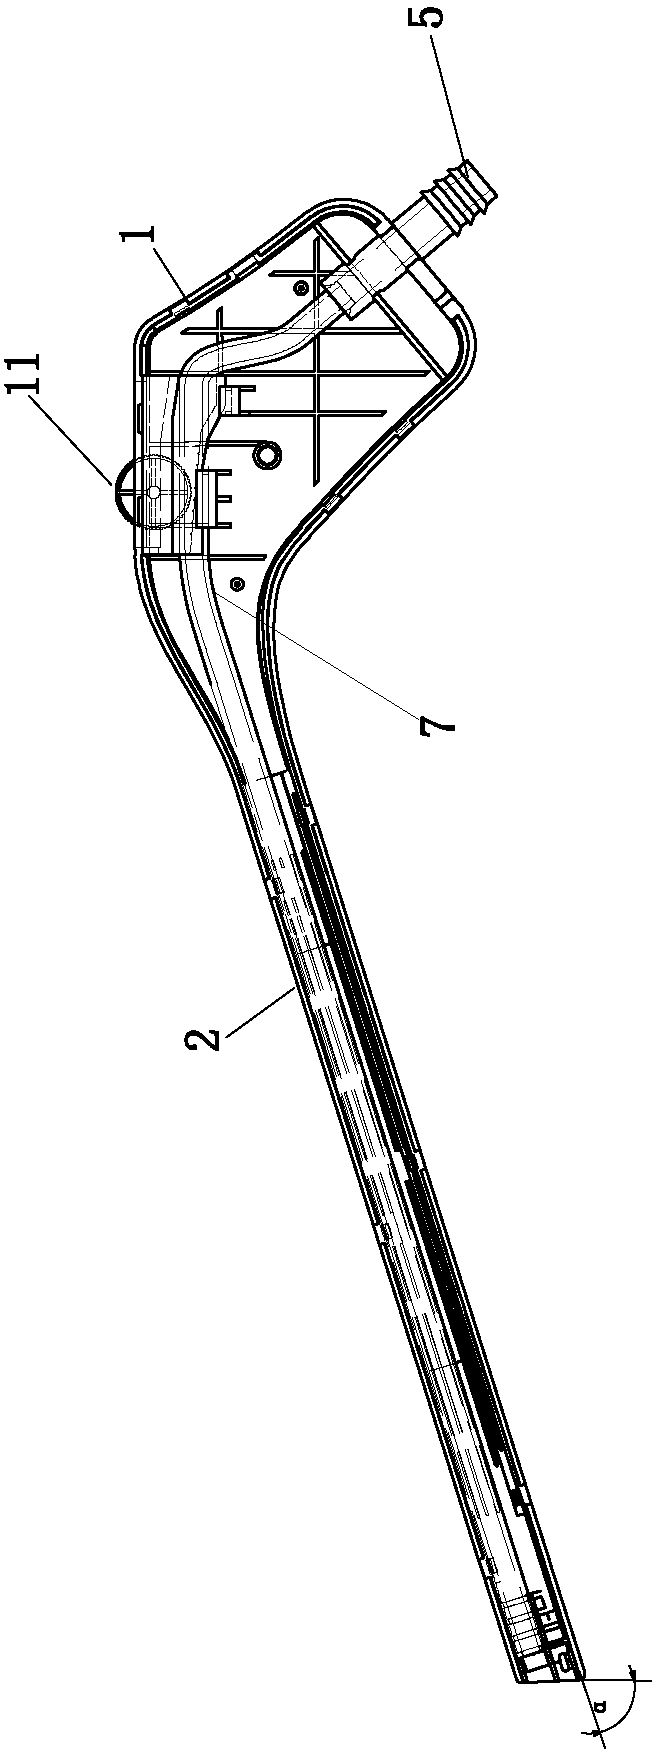 Multifunctional irrigation and suction device